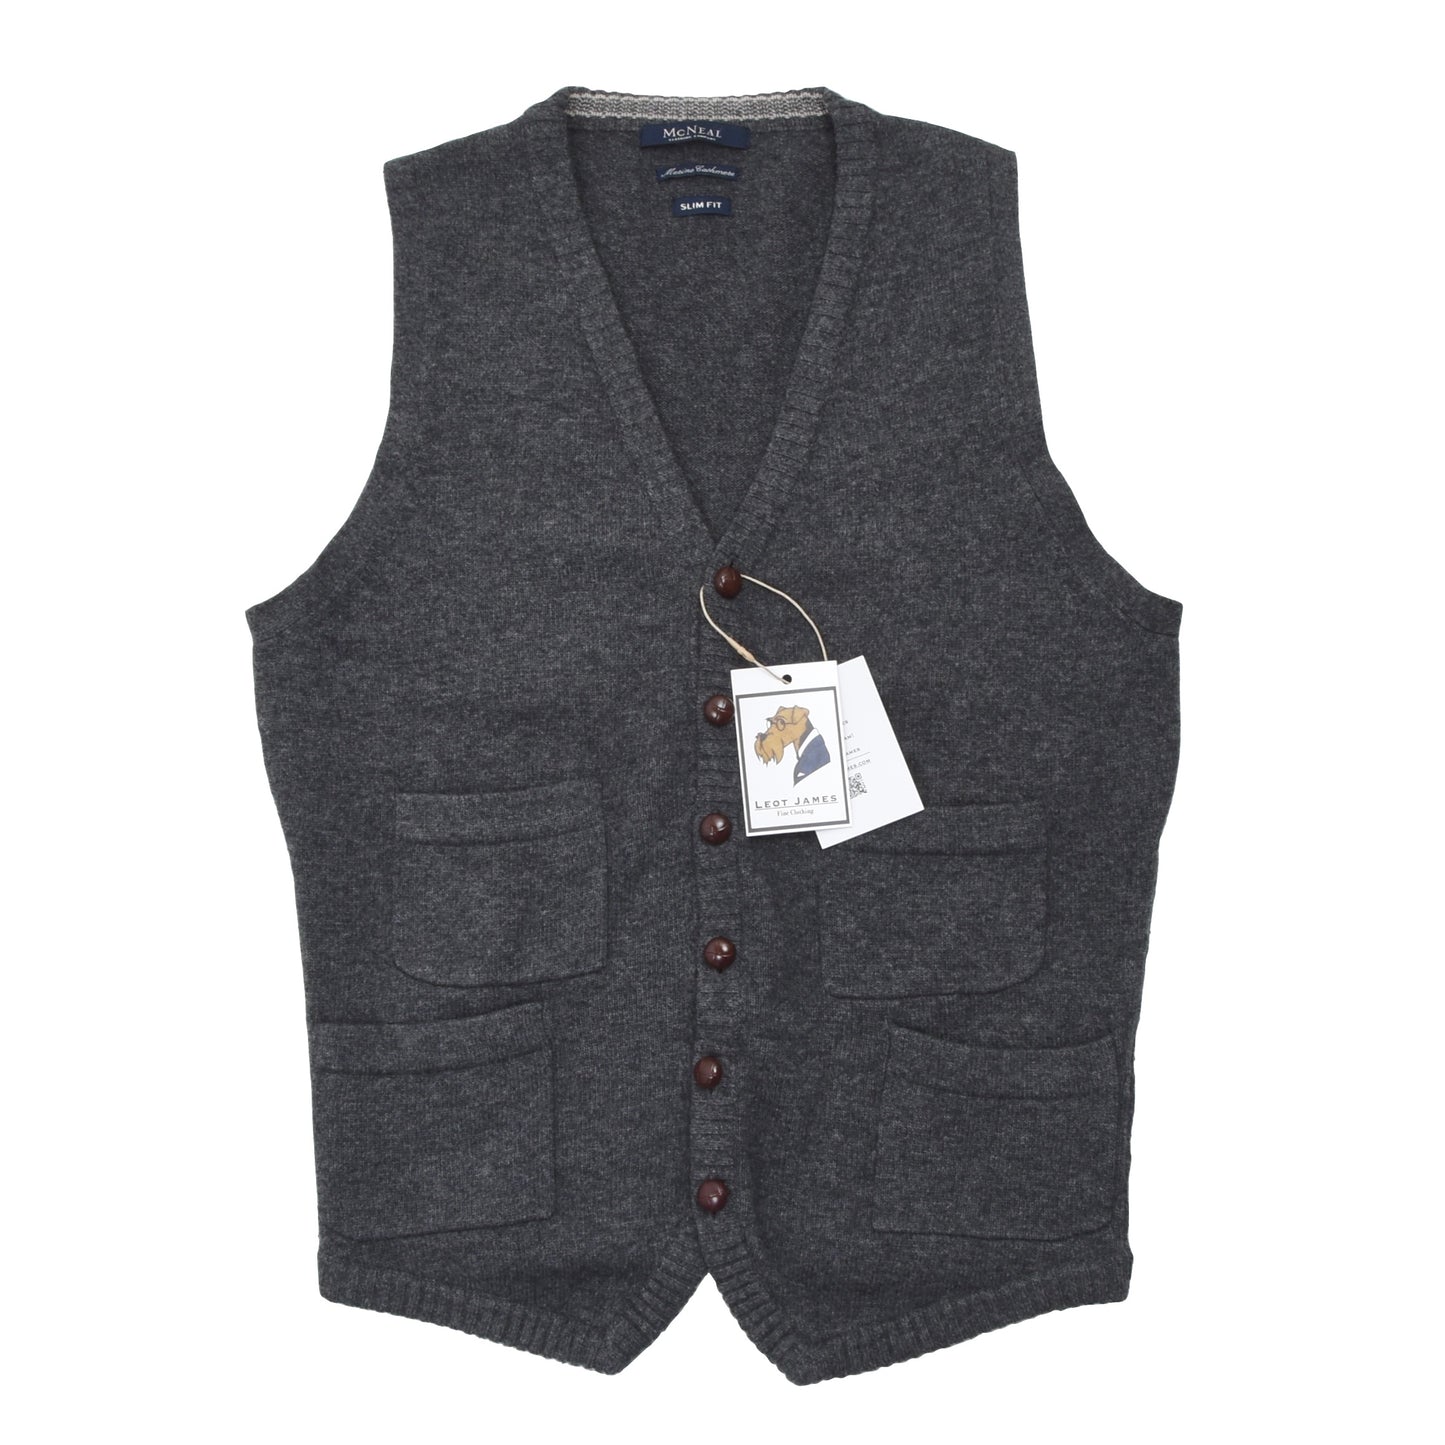 McNeal Wool/Cashmere Sweater Vest/Waistcoat Size S Slim Fit - Grey